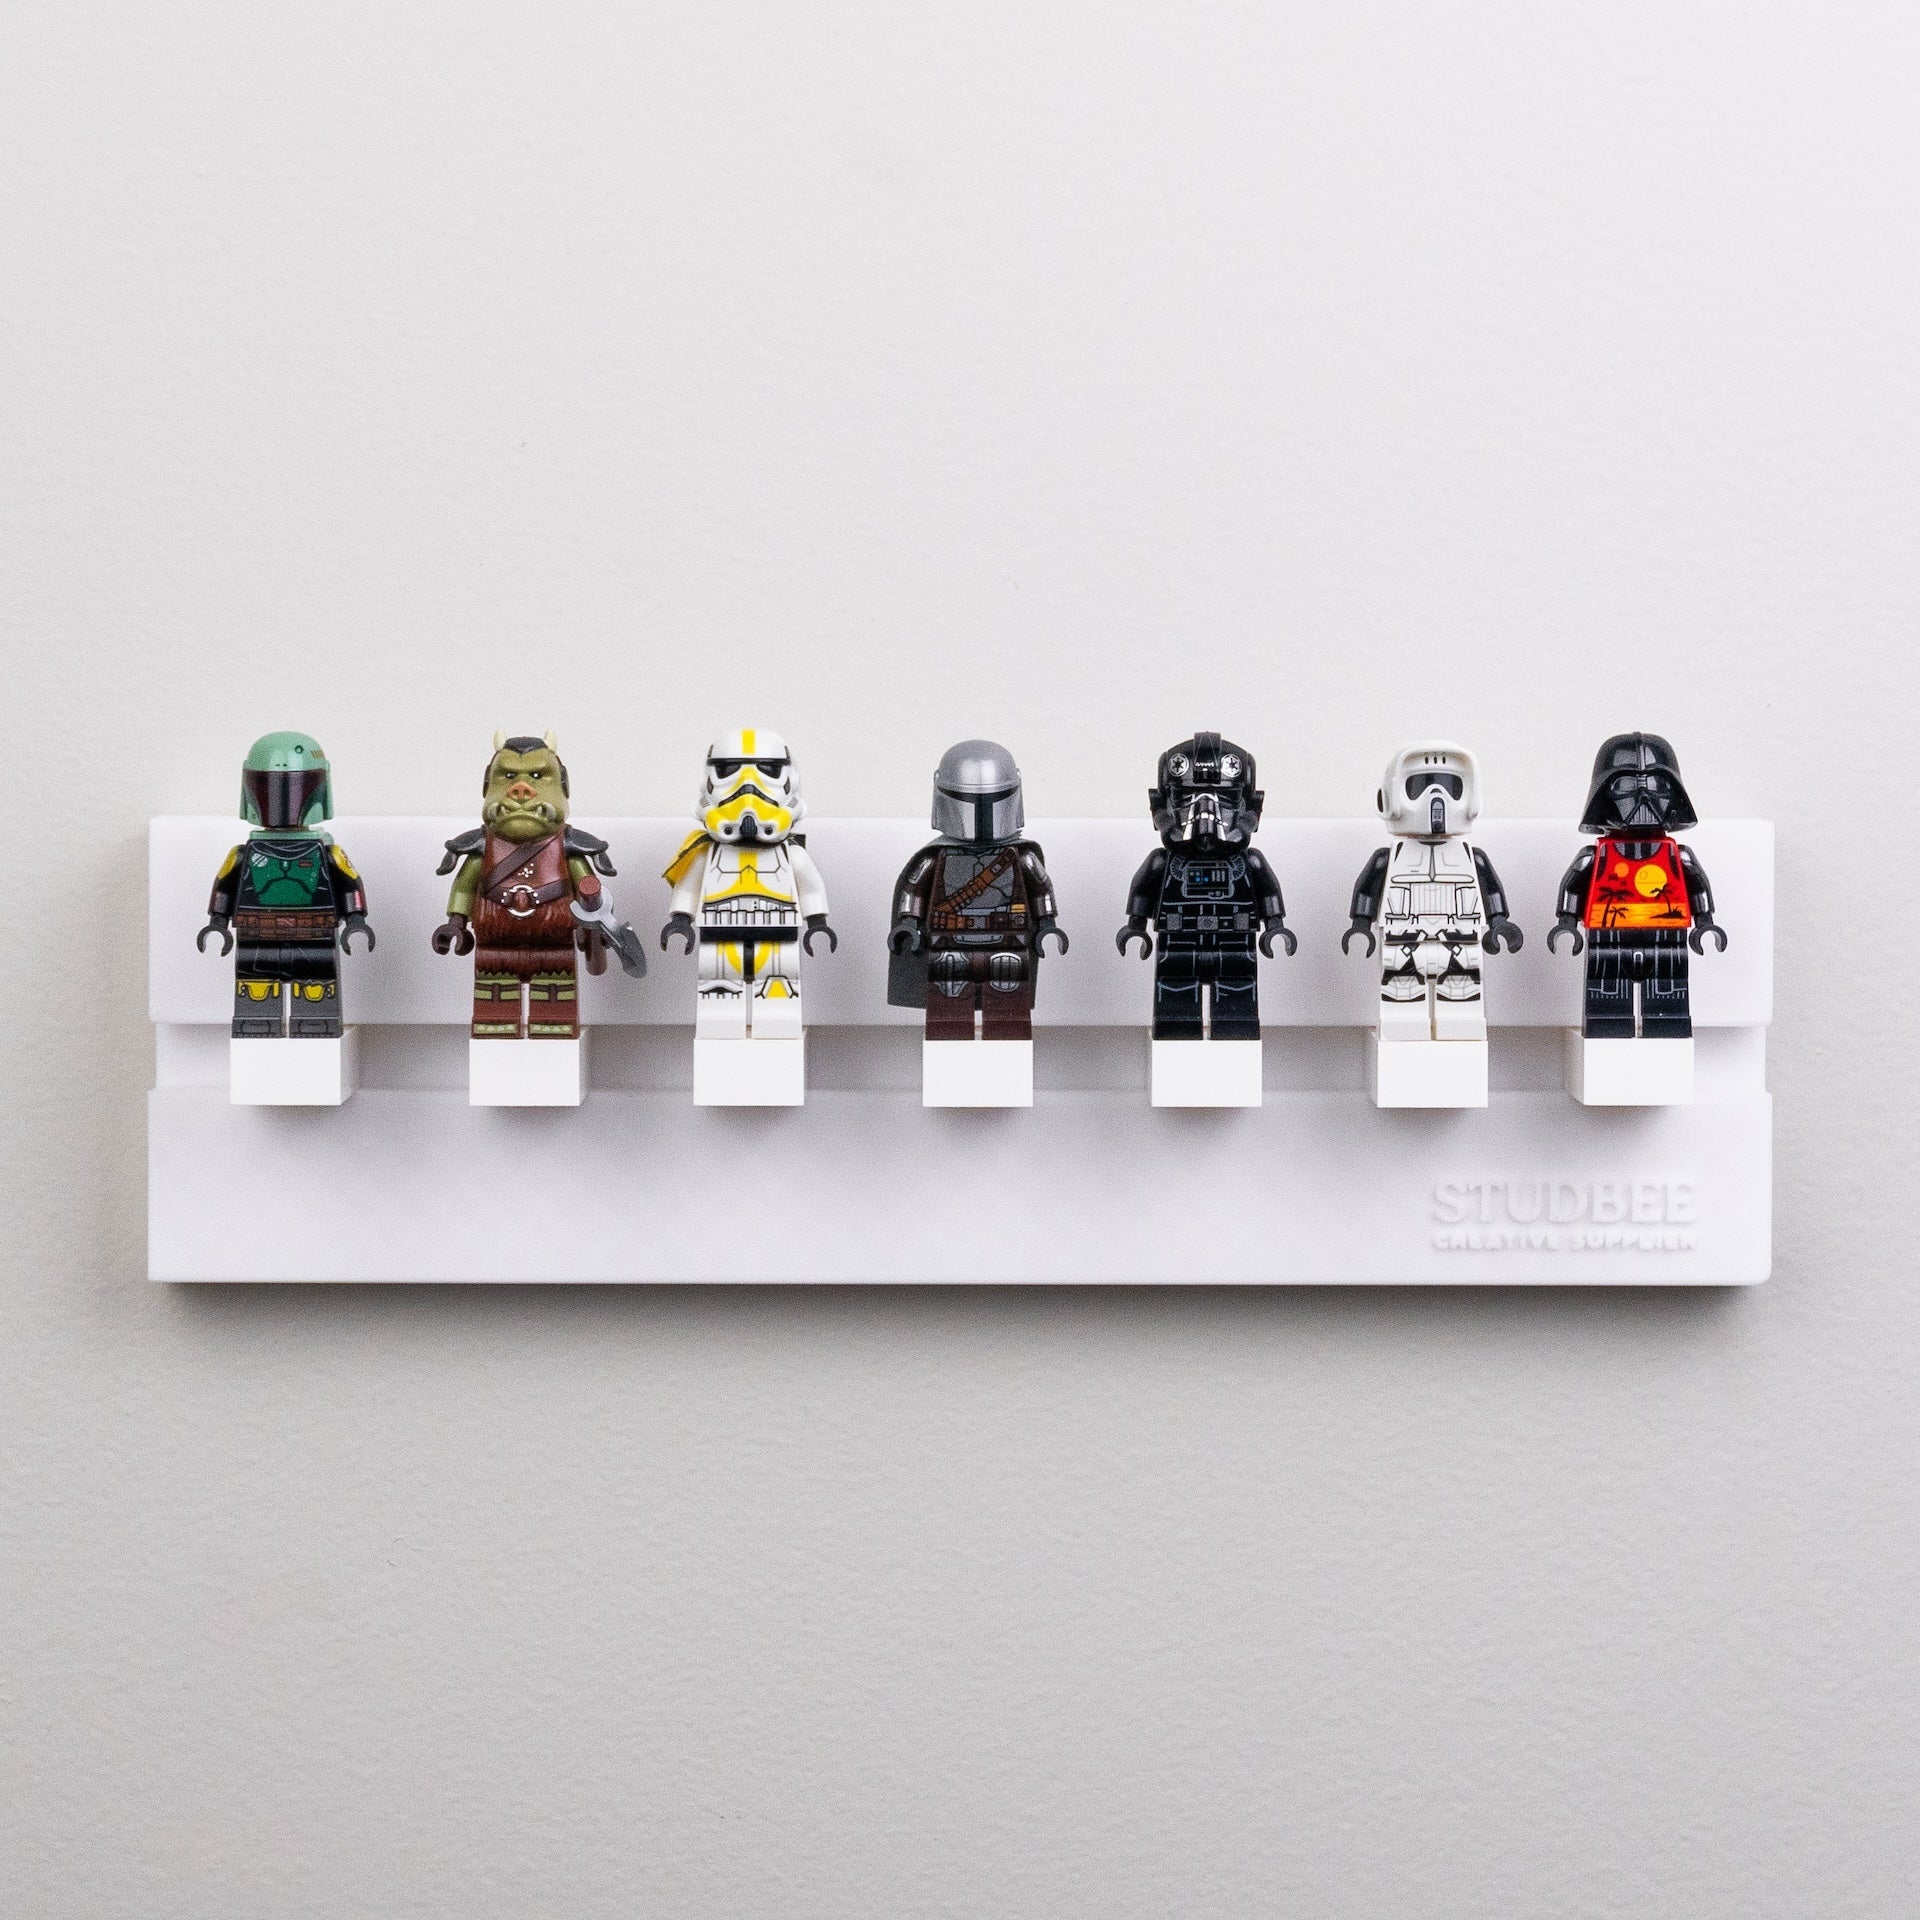 A row of seven themed mini-figures on a white single-tier shelf, including characters in armor and helmets.